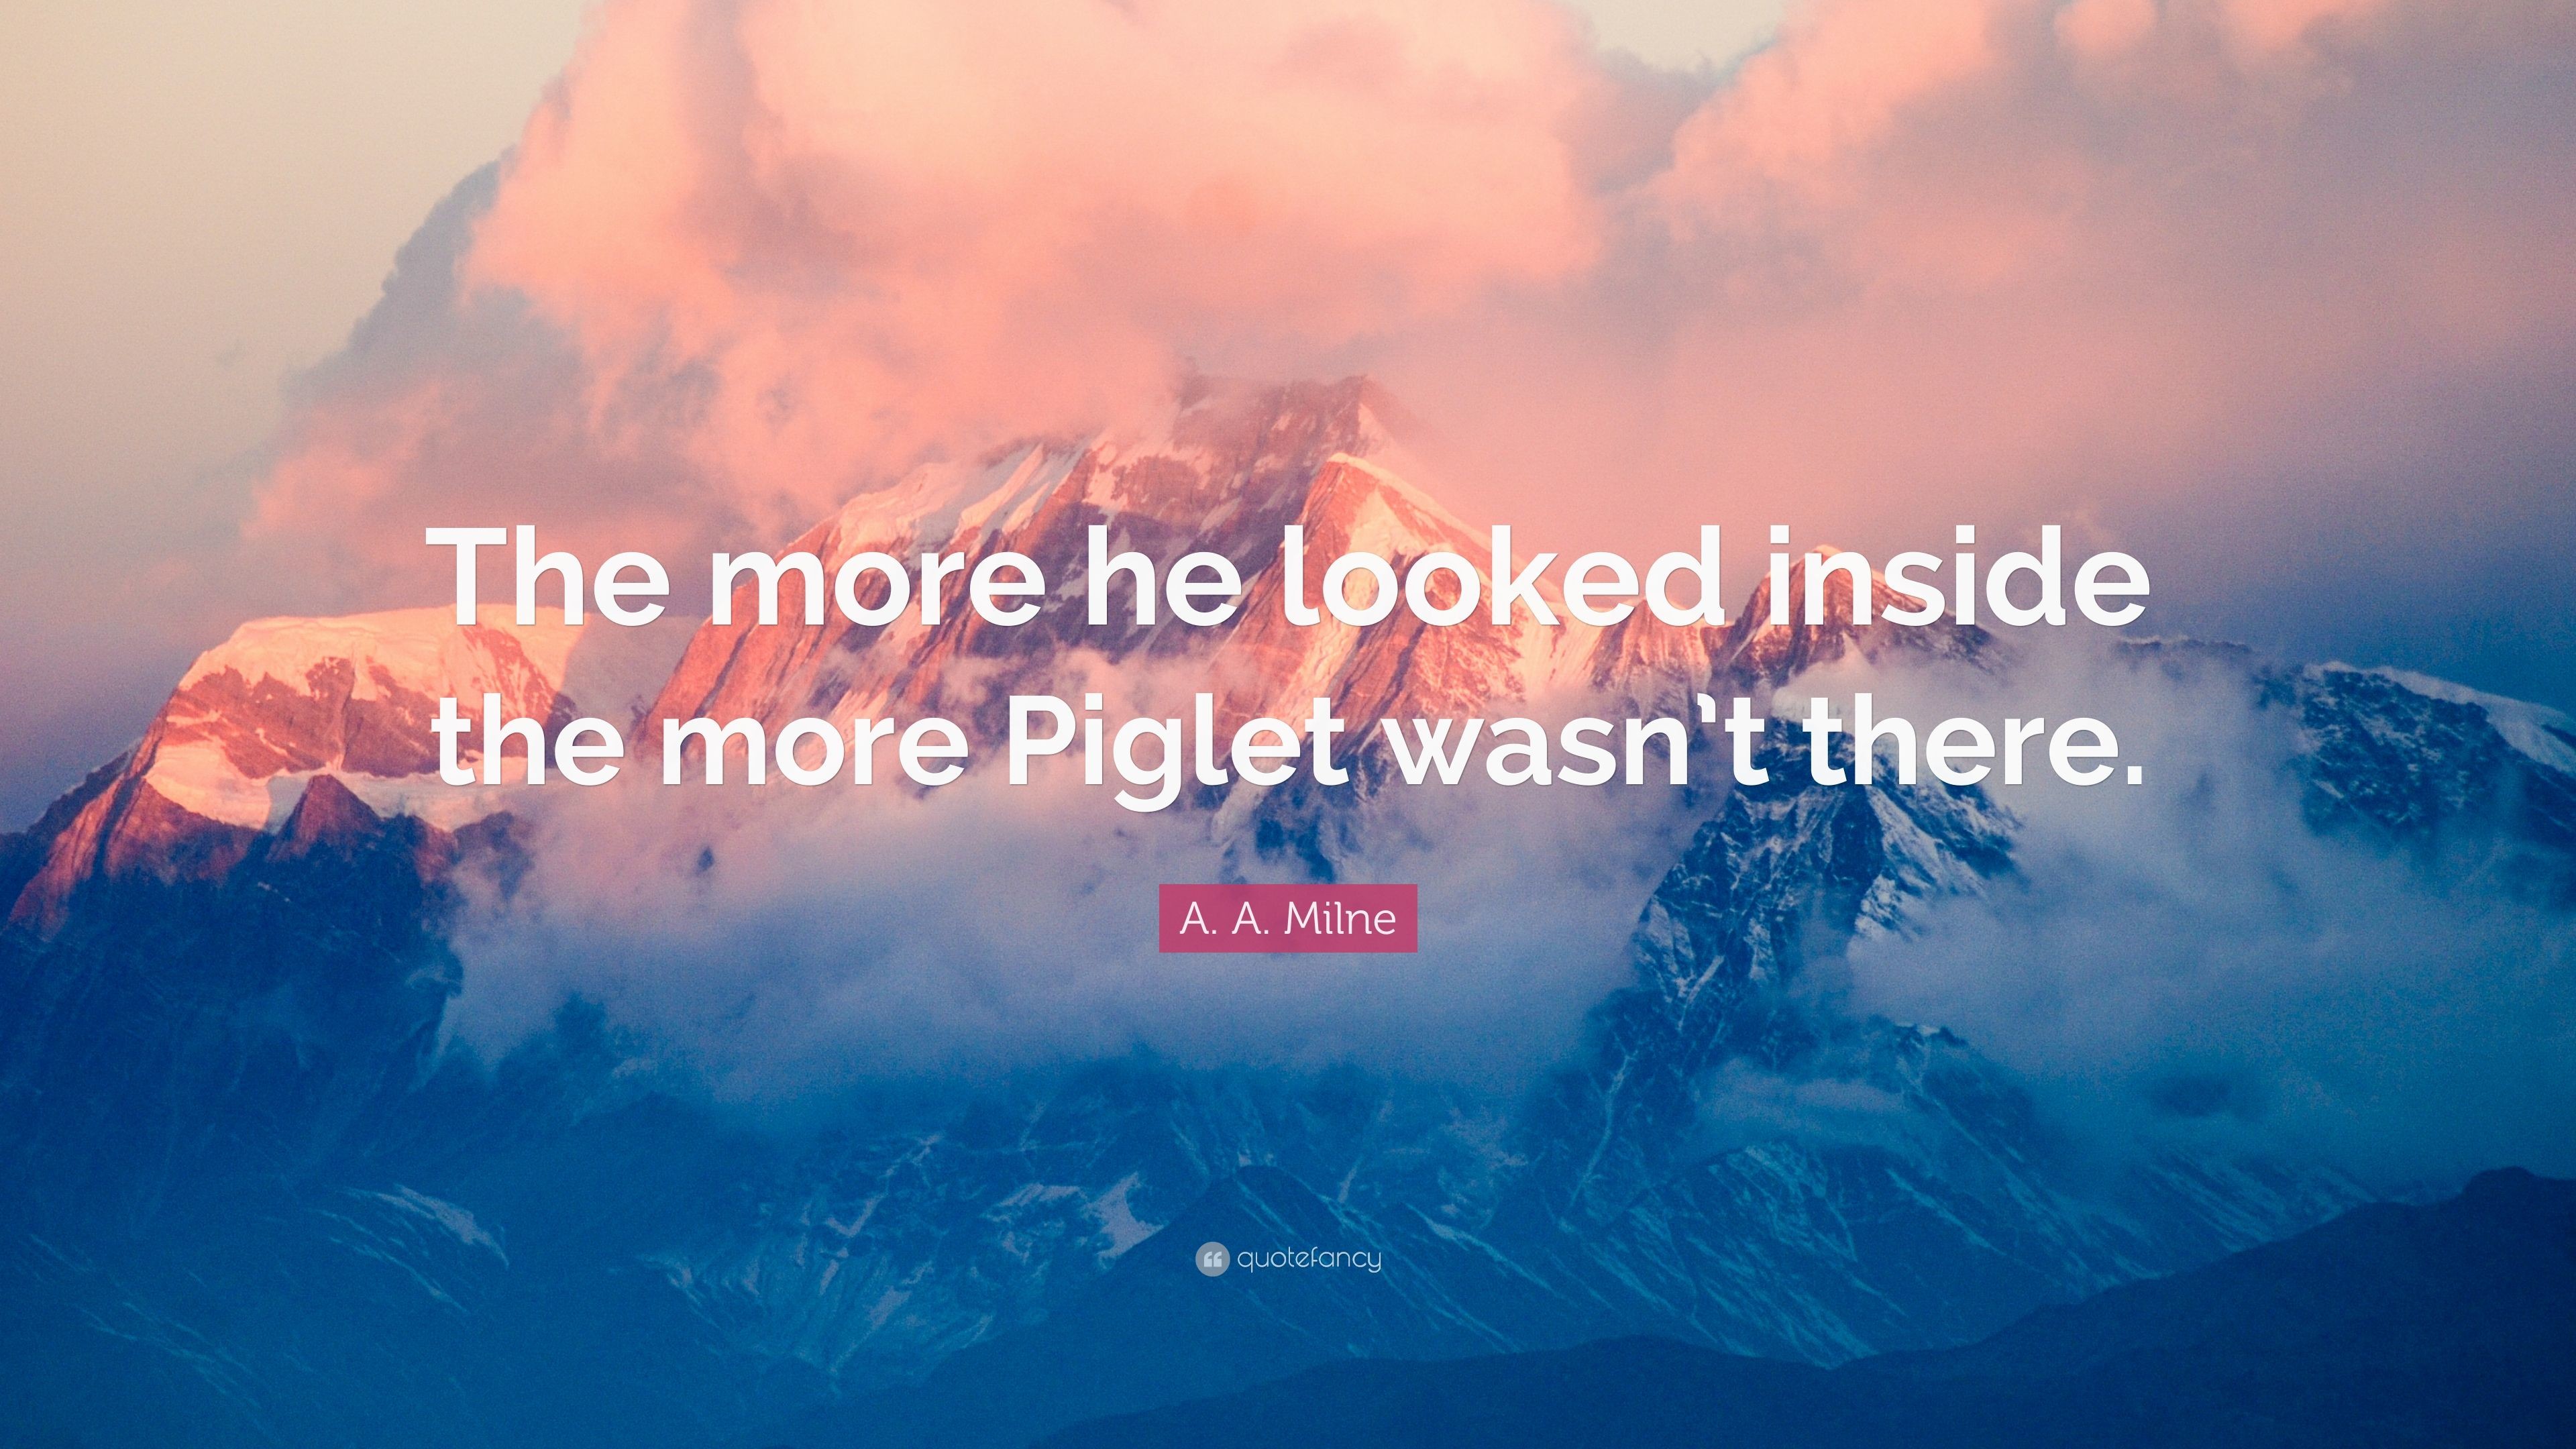 3840x2160 A. A. Milne Quote: “The more he looked inside the more Piglet wasn't